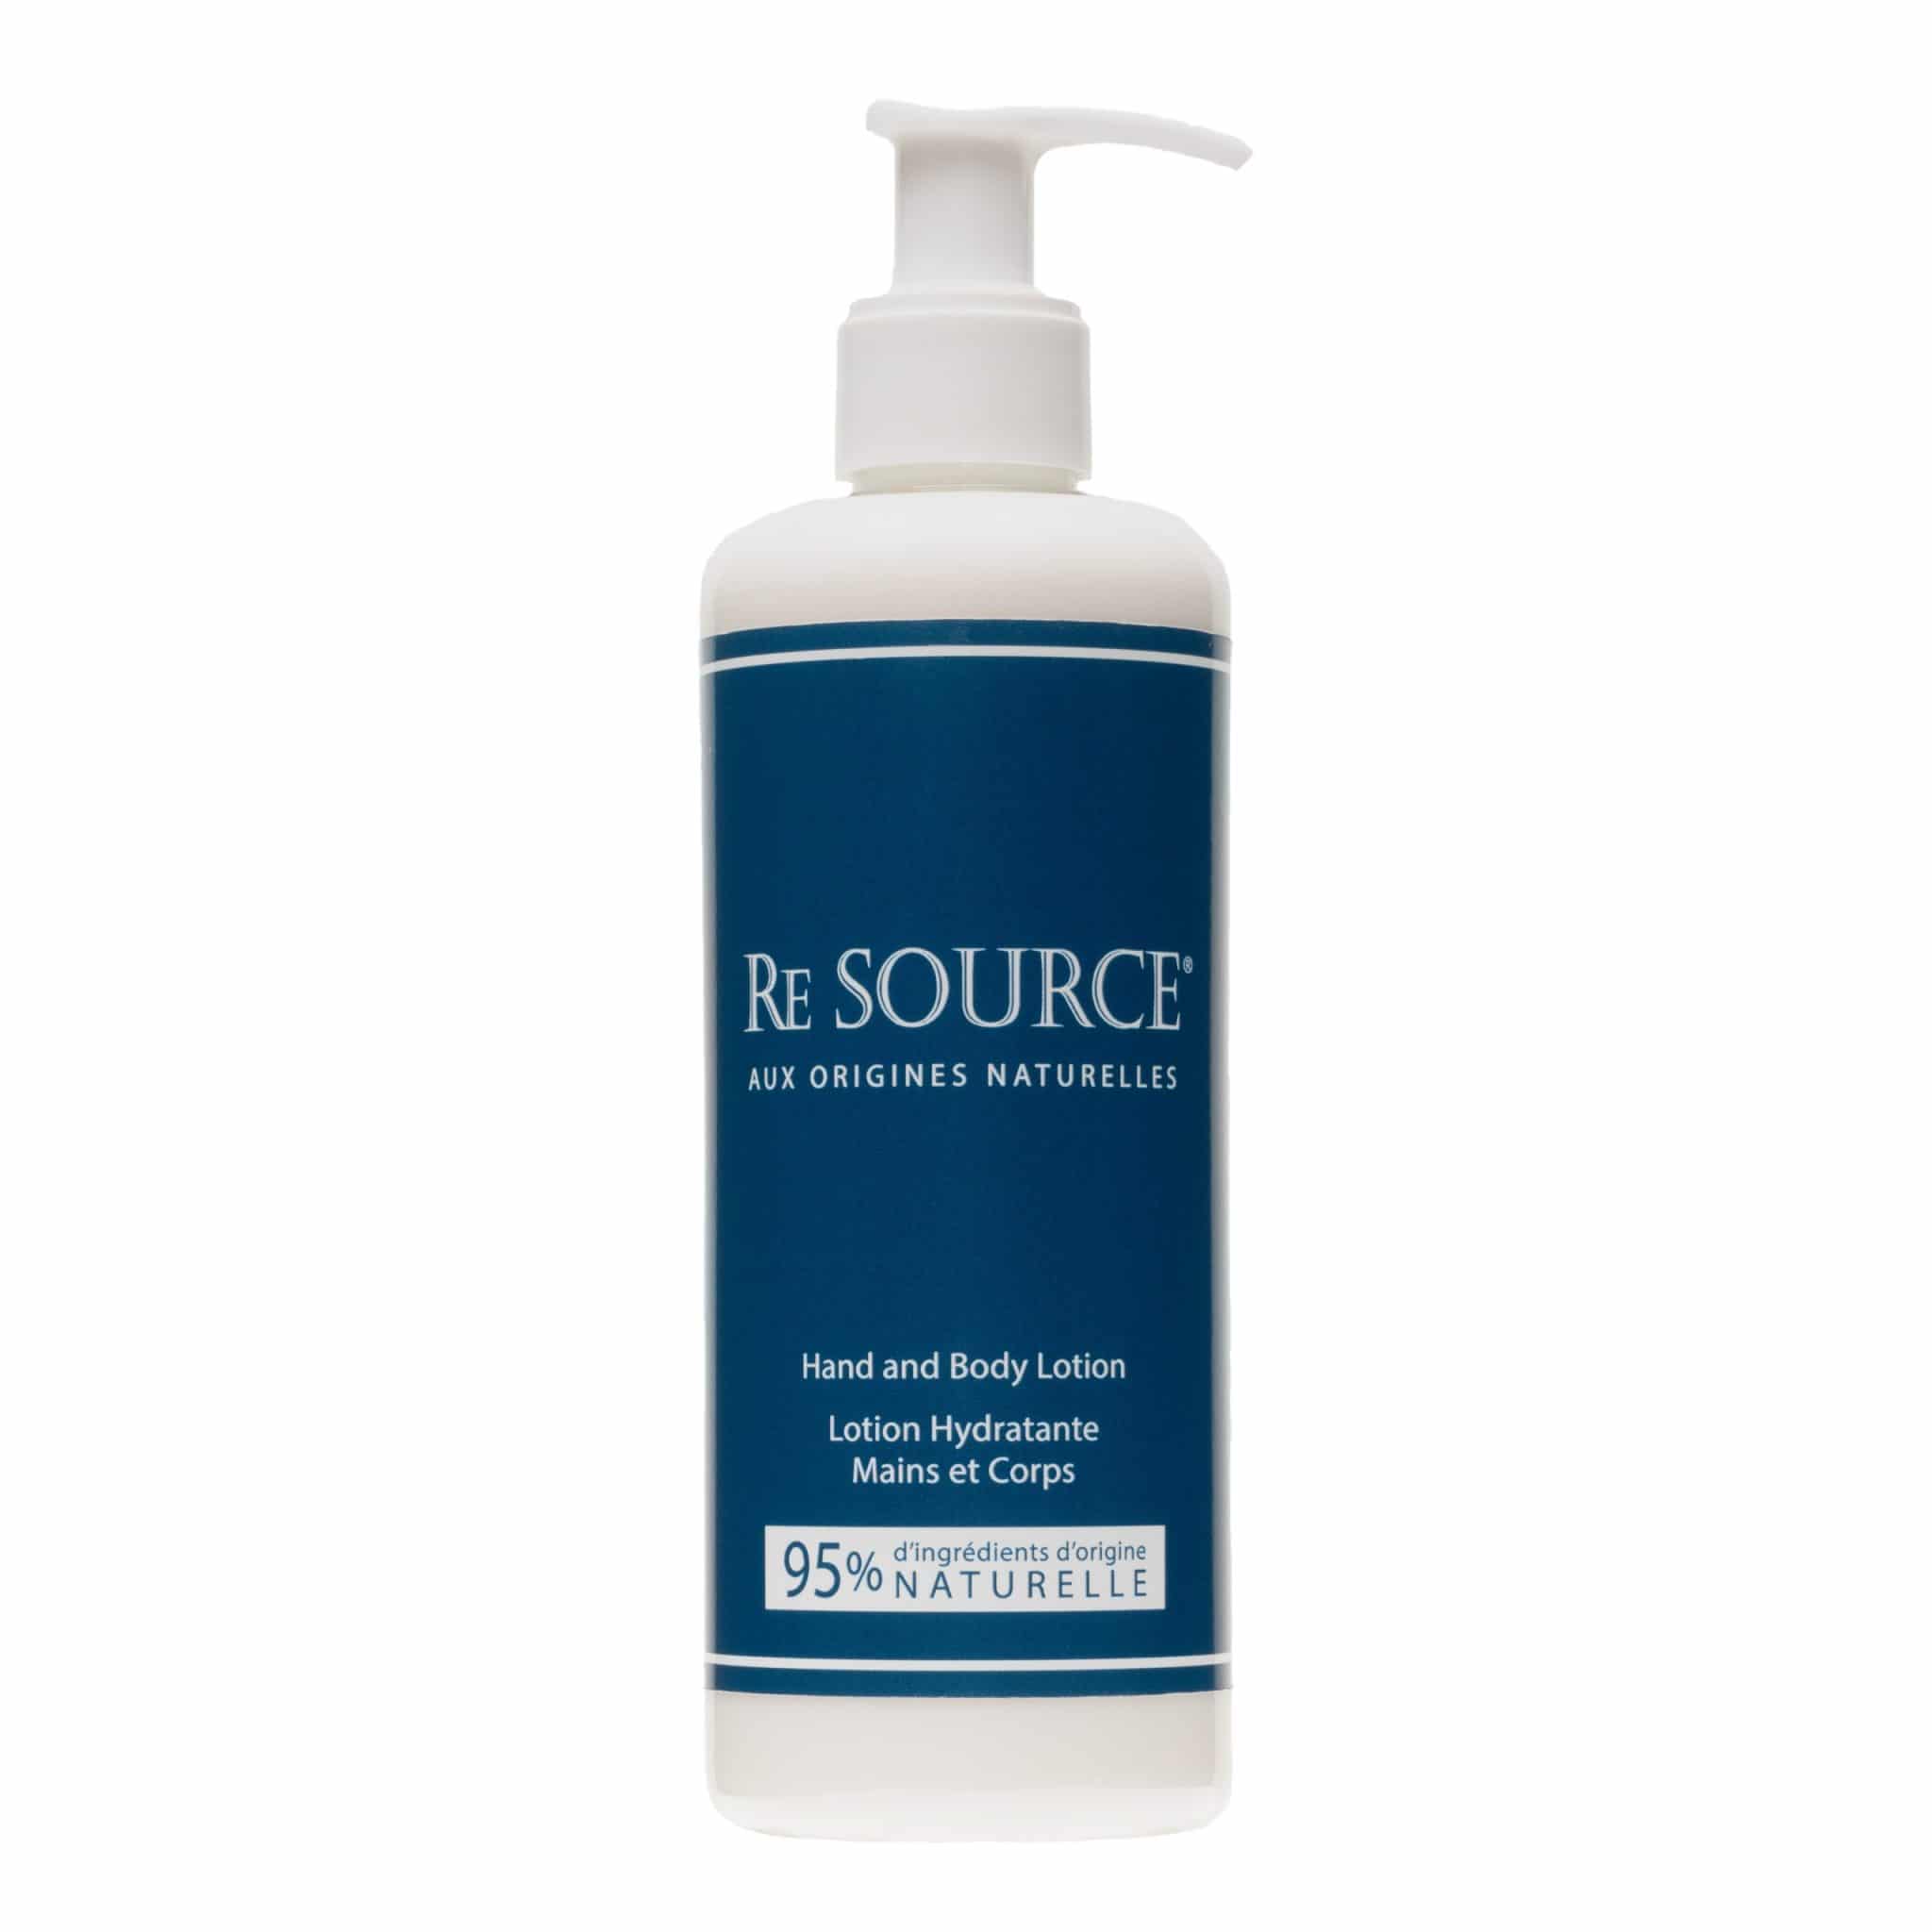 HD Fragrance-Re-source-lotion-hydratante